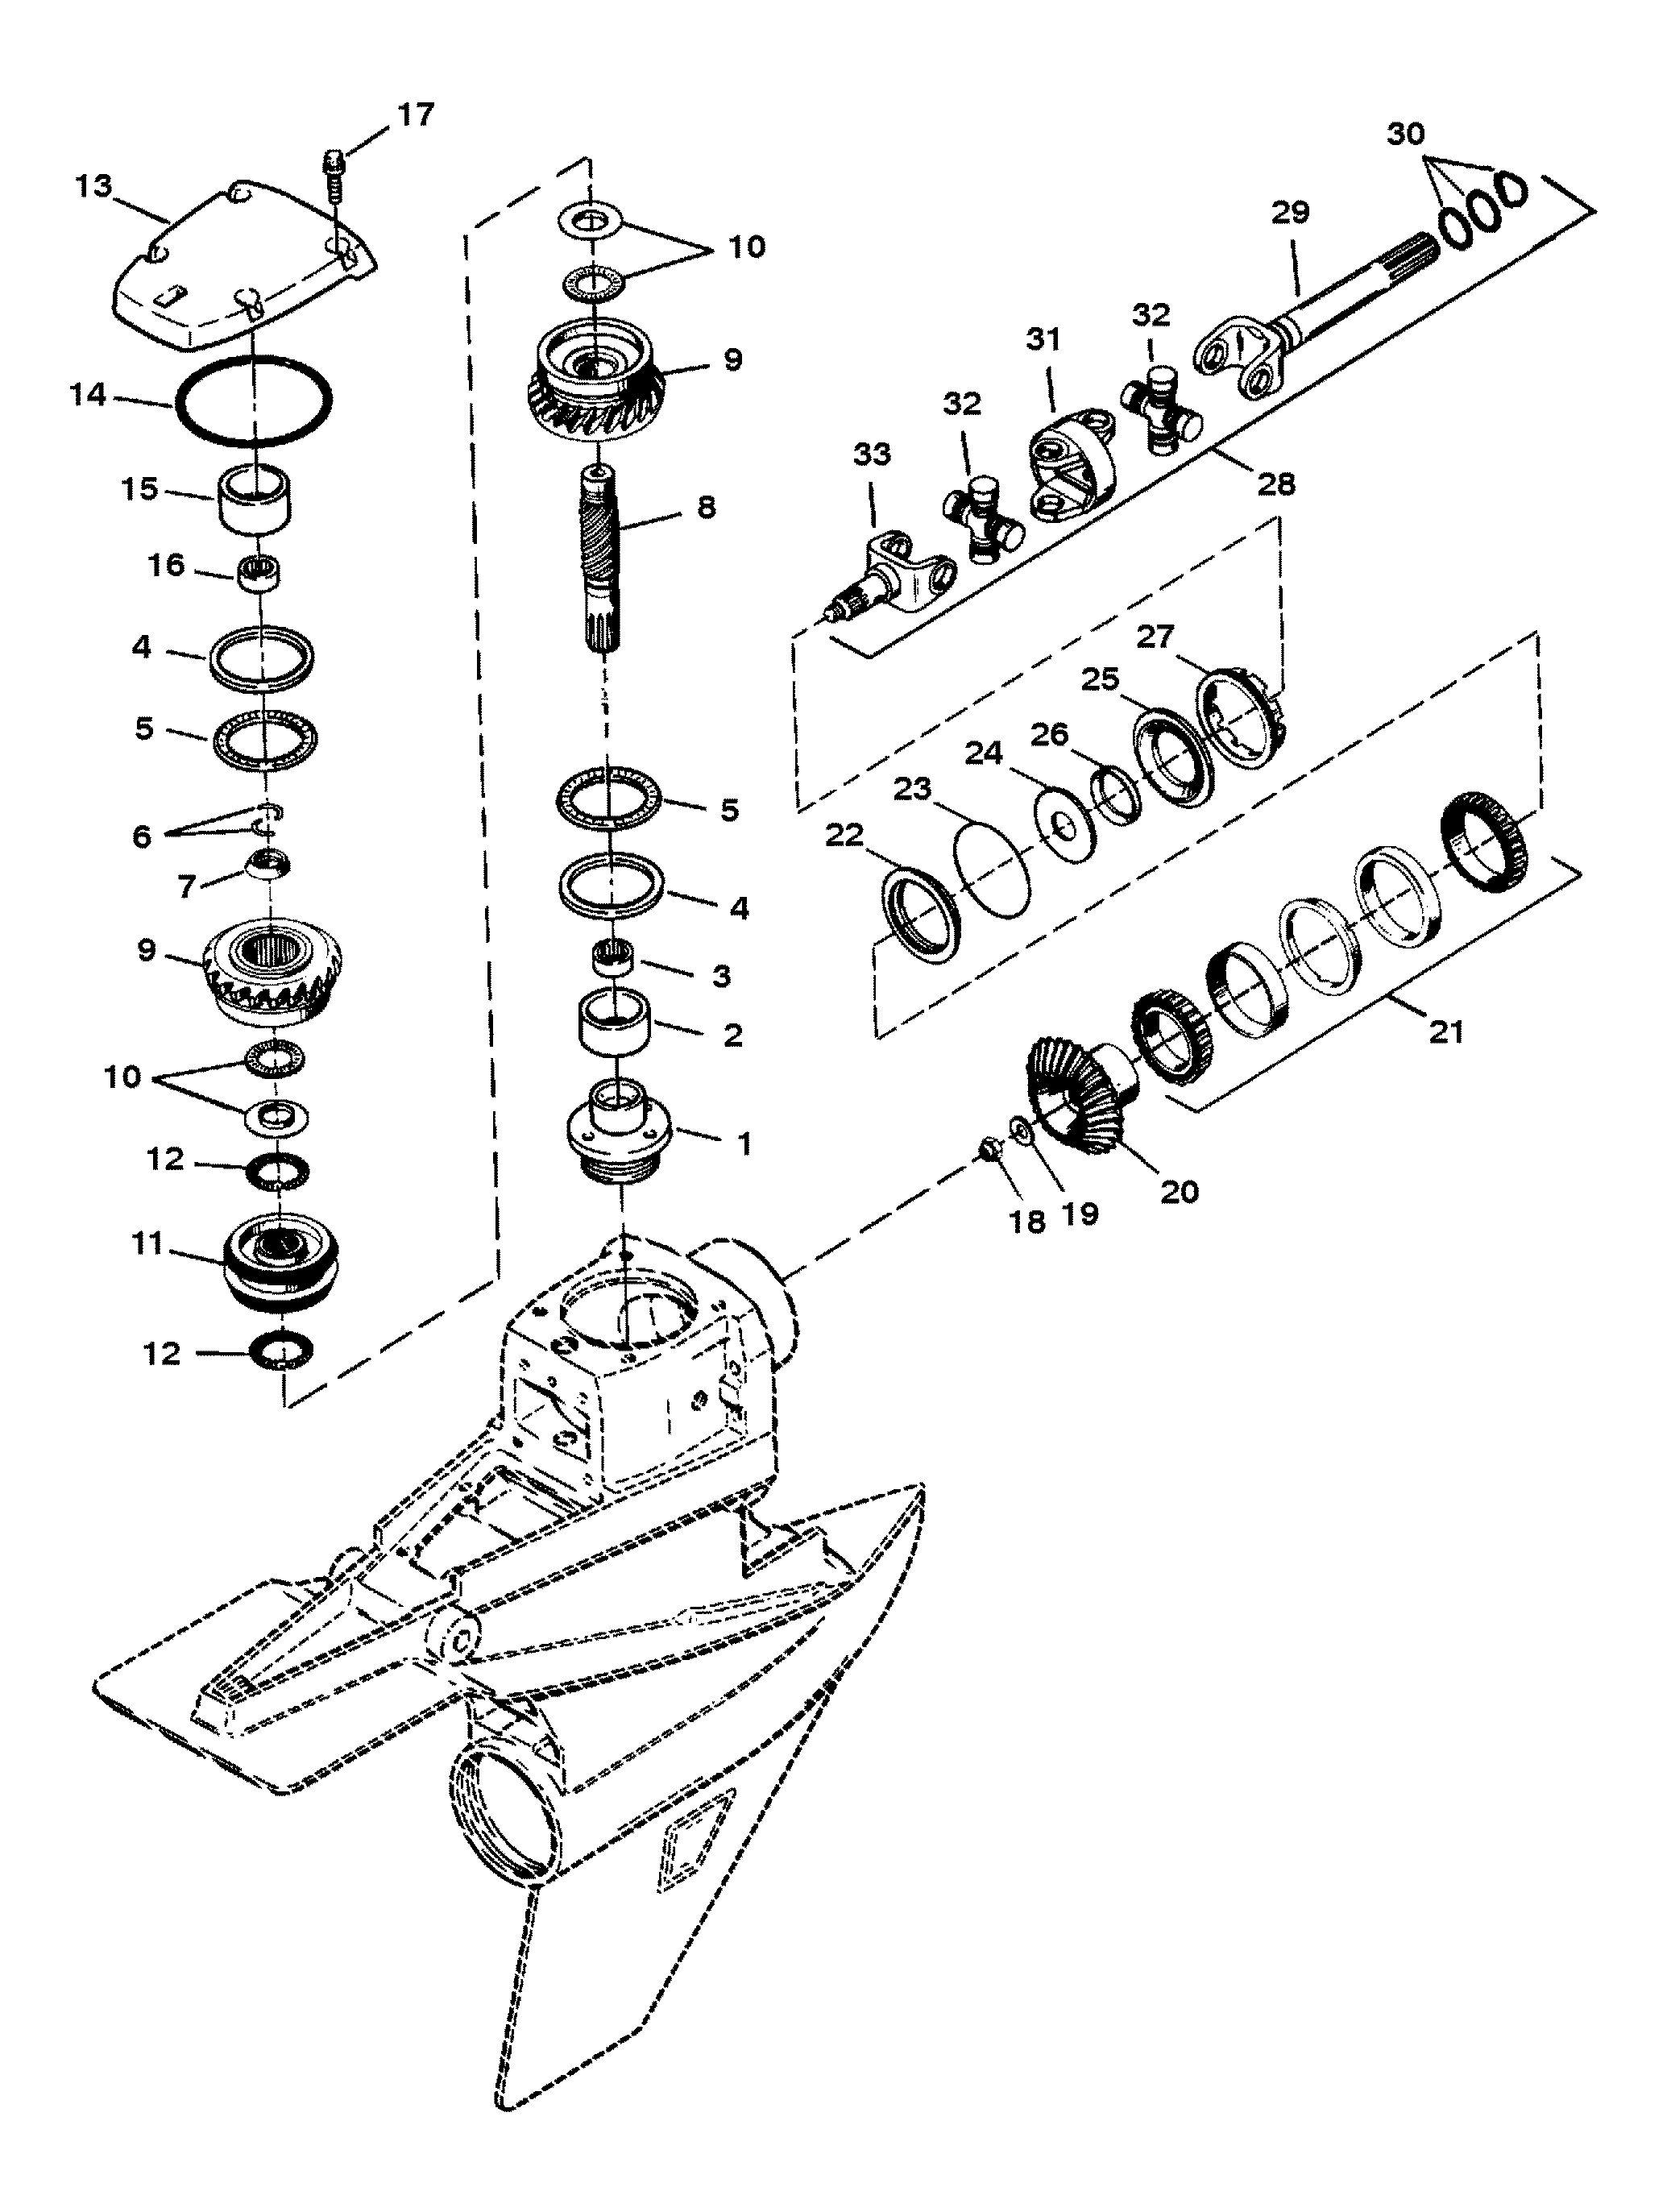 UPPER GEARS AND COMPONENTS